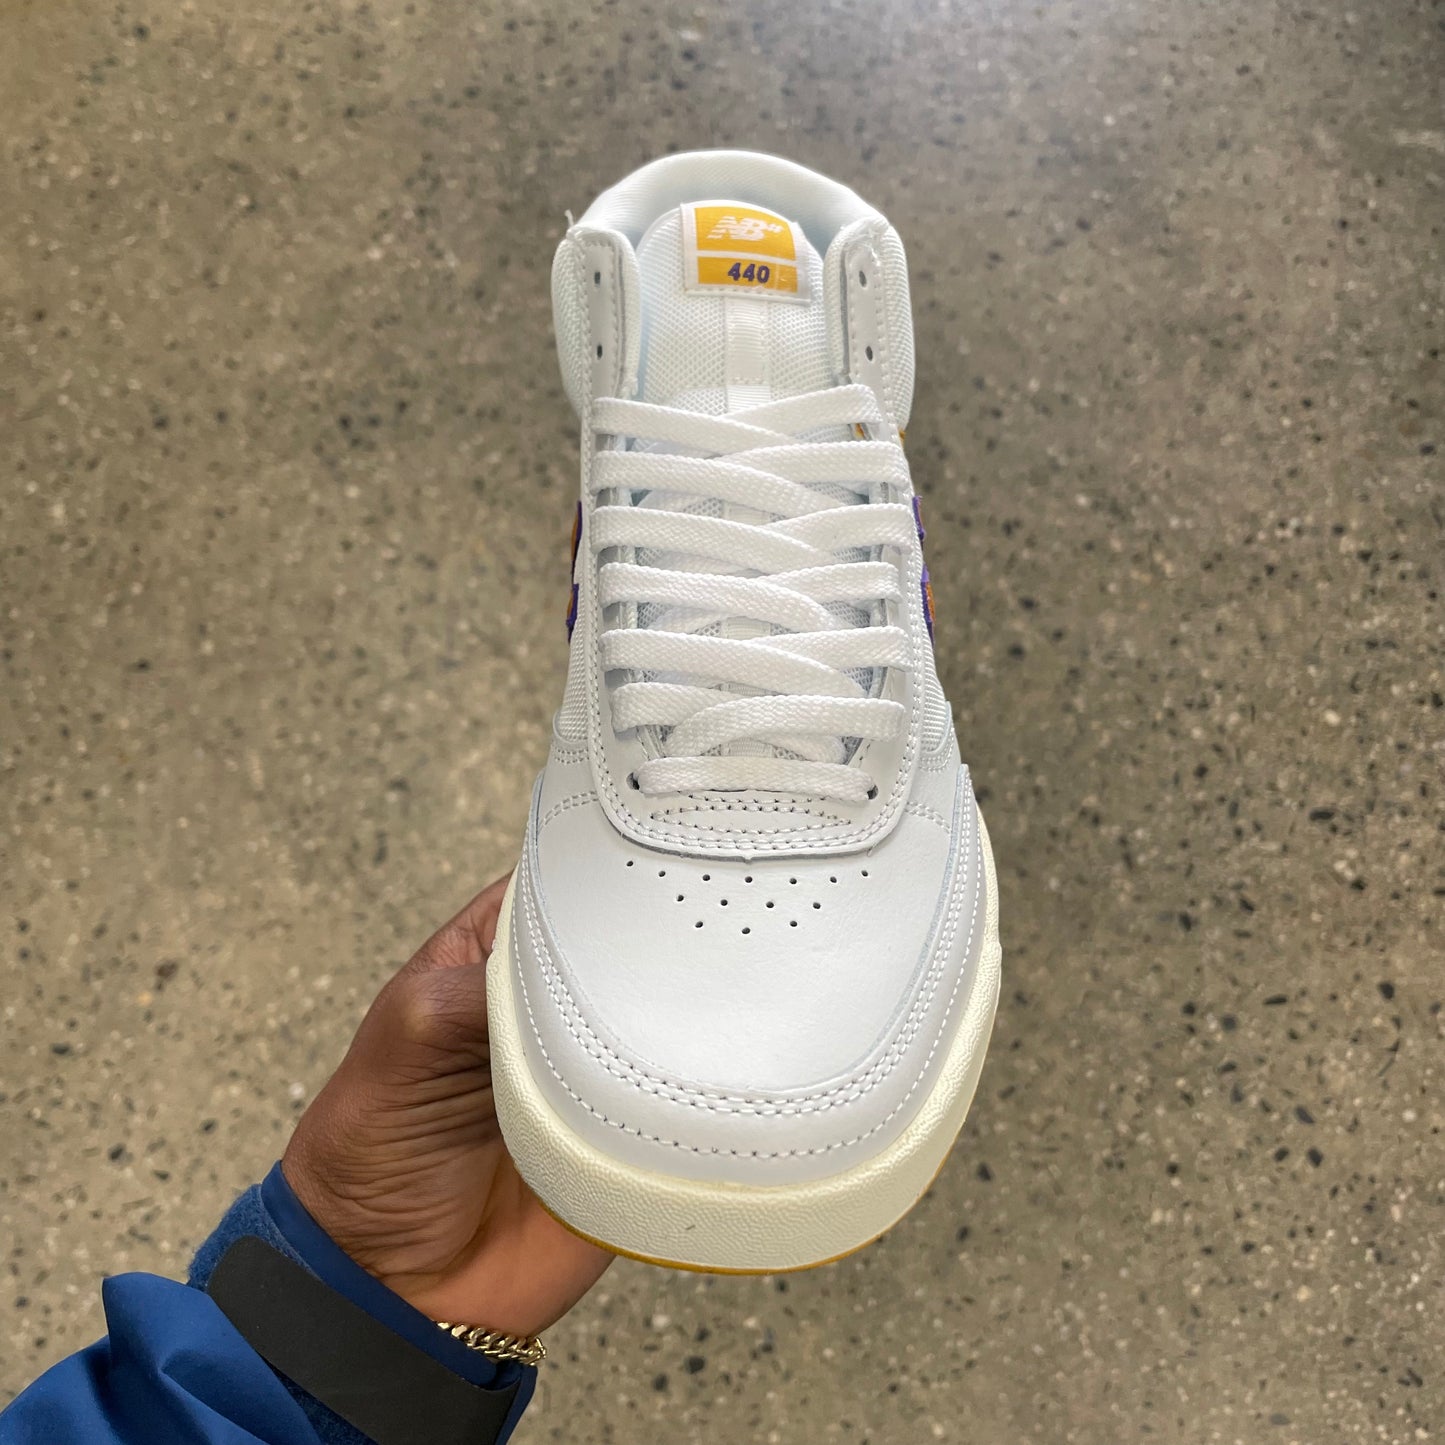 white hi top sneaker with yellow N and white sole, front view